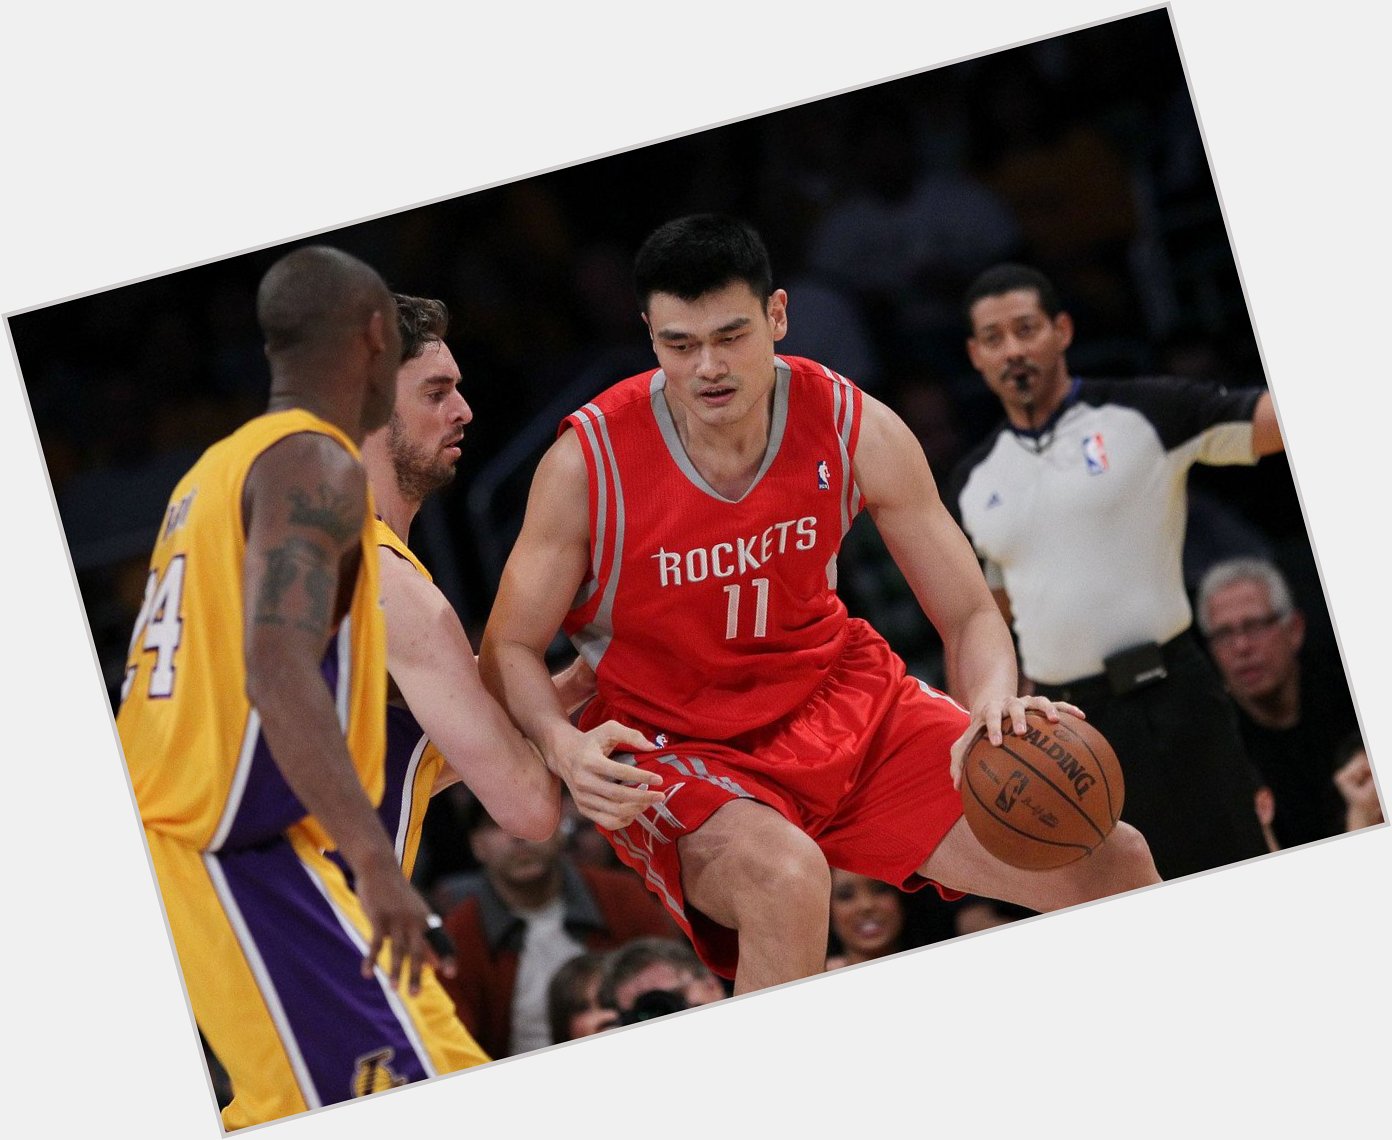 Happy Birthday Yao Ming!! The 8 time NBA All-Star turns 39 today. What is your favorite Yao Ming moment?? 